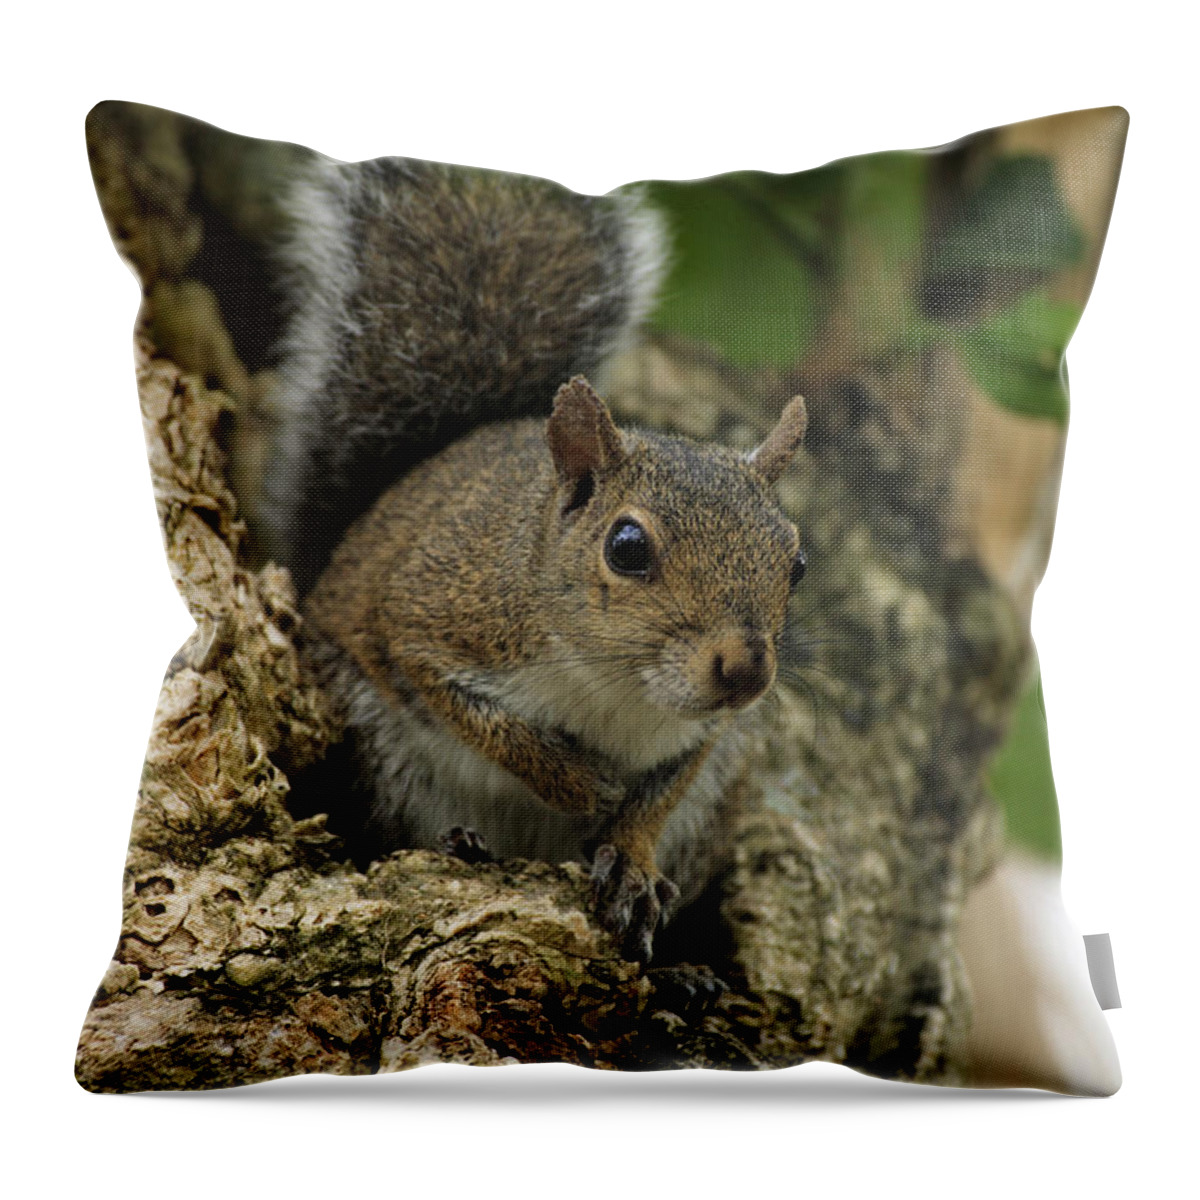 Eastern Gray Squirrel Throw Pillow featuring the photograph Eastern Gray Squirrel by Sohns/Okapia